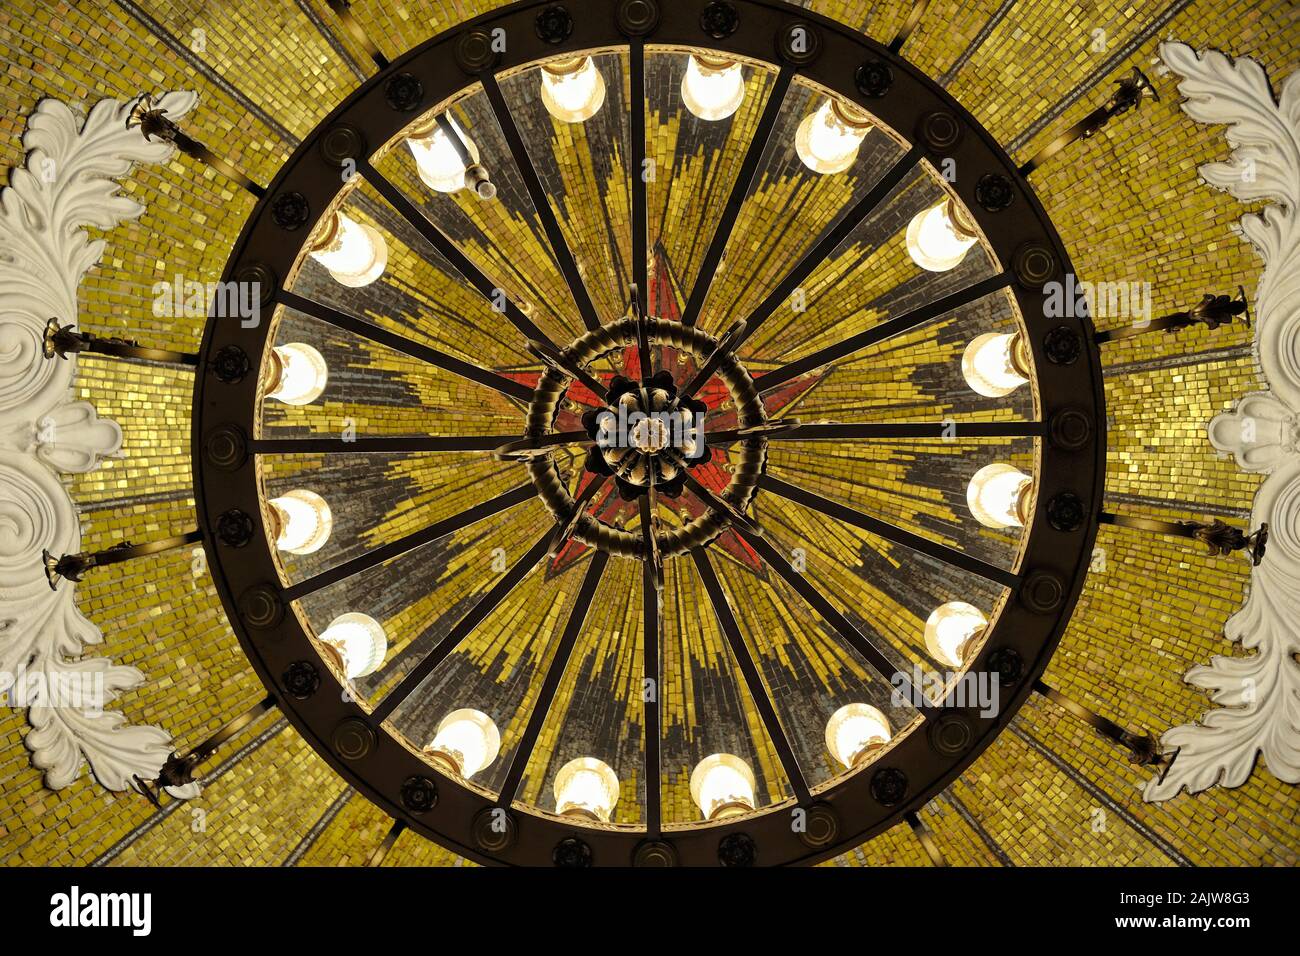 = Under Chandelier and Mosaic Panel of Red Star with Gold Beams =  Directly below view of illuminated bronze chandelier hanging from a dome in interme Stock Photo